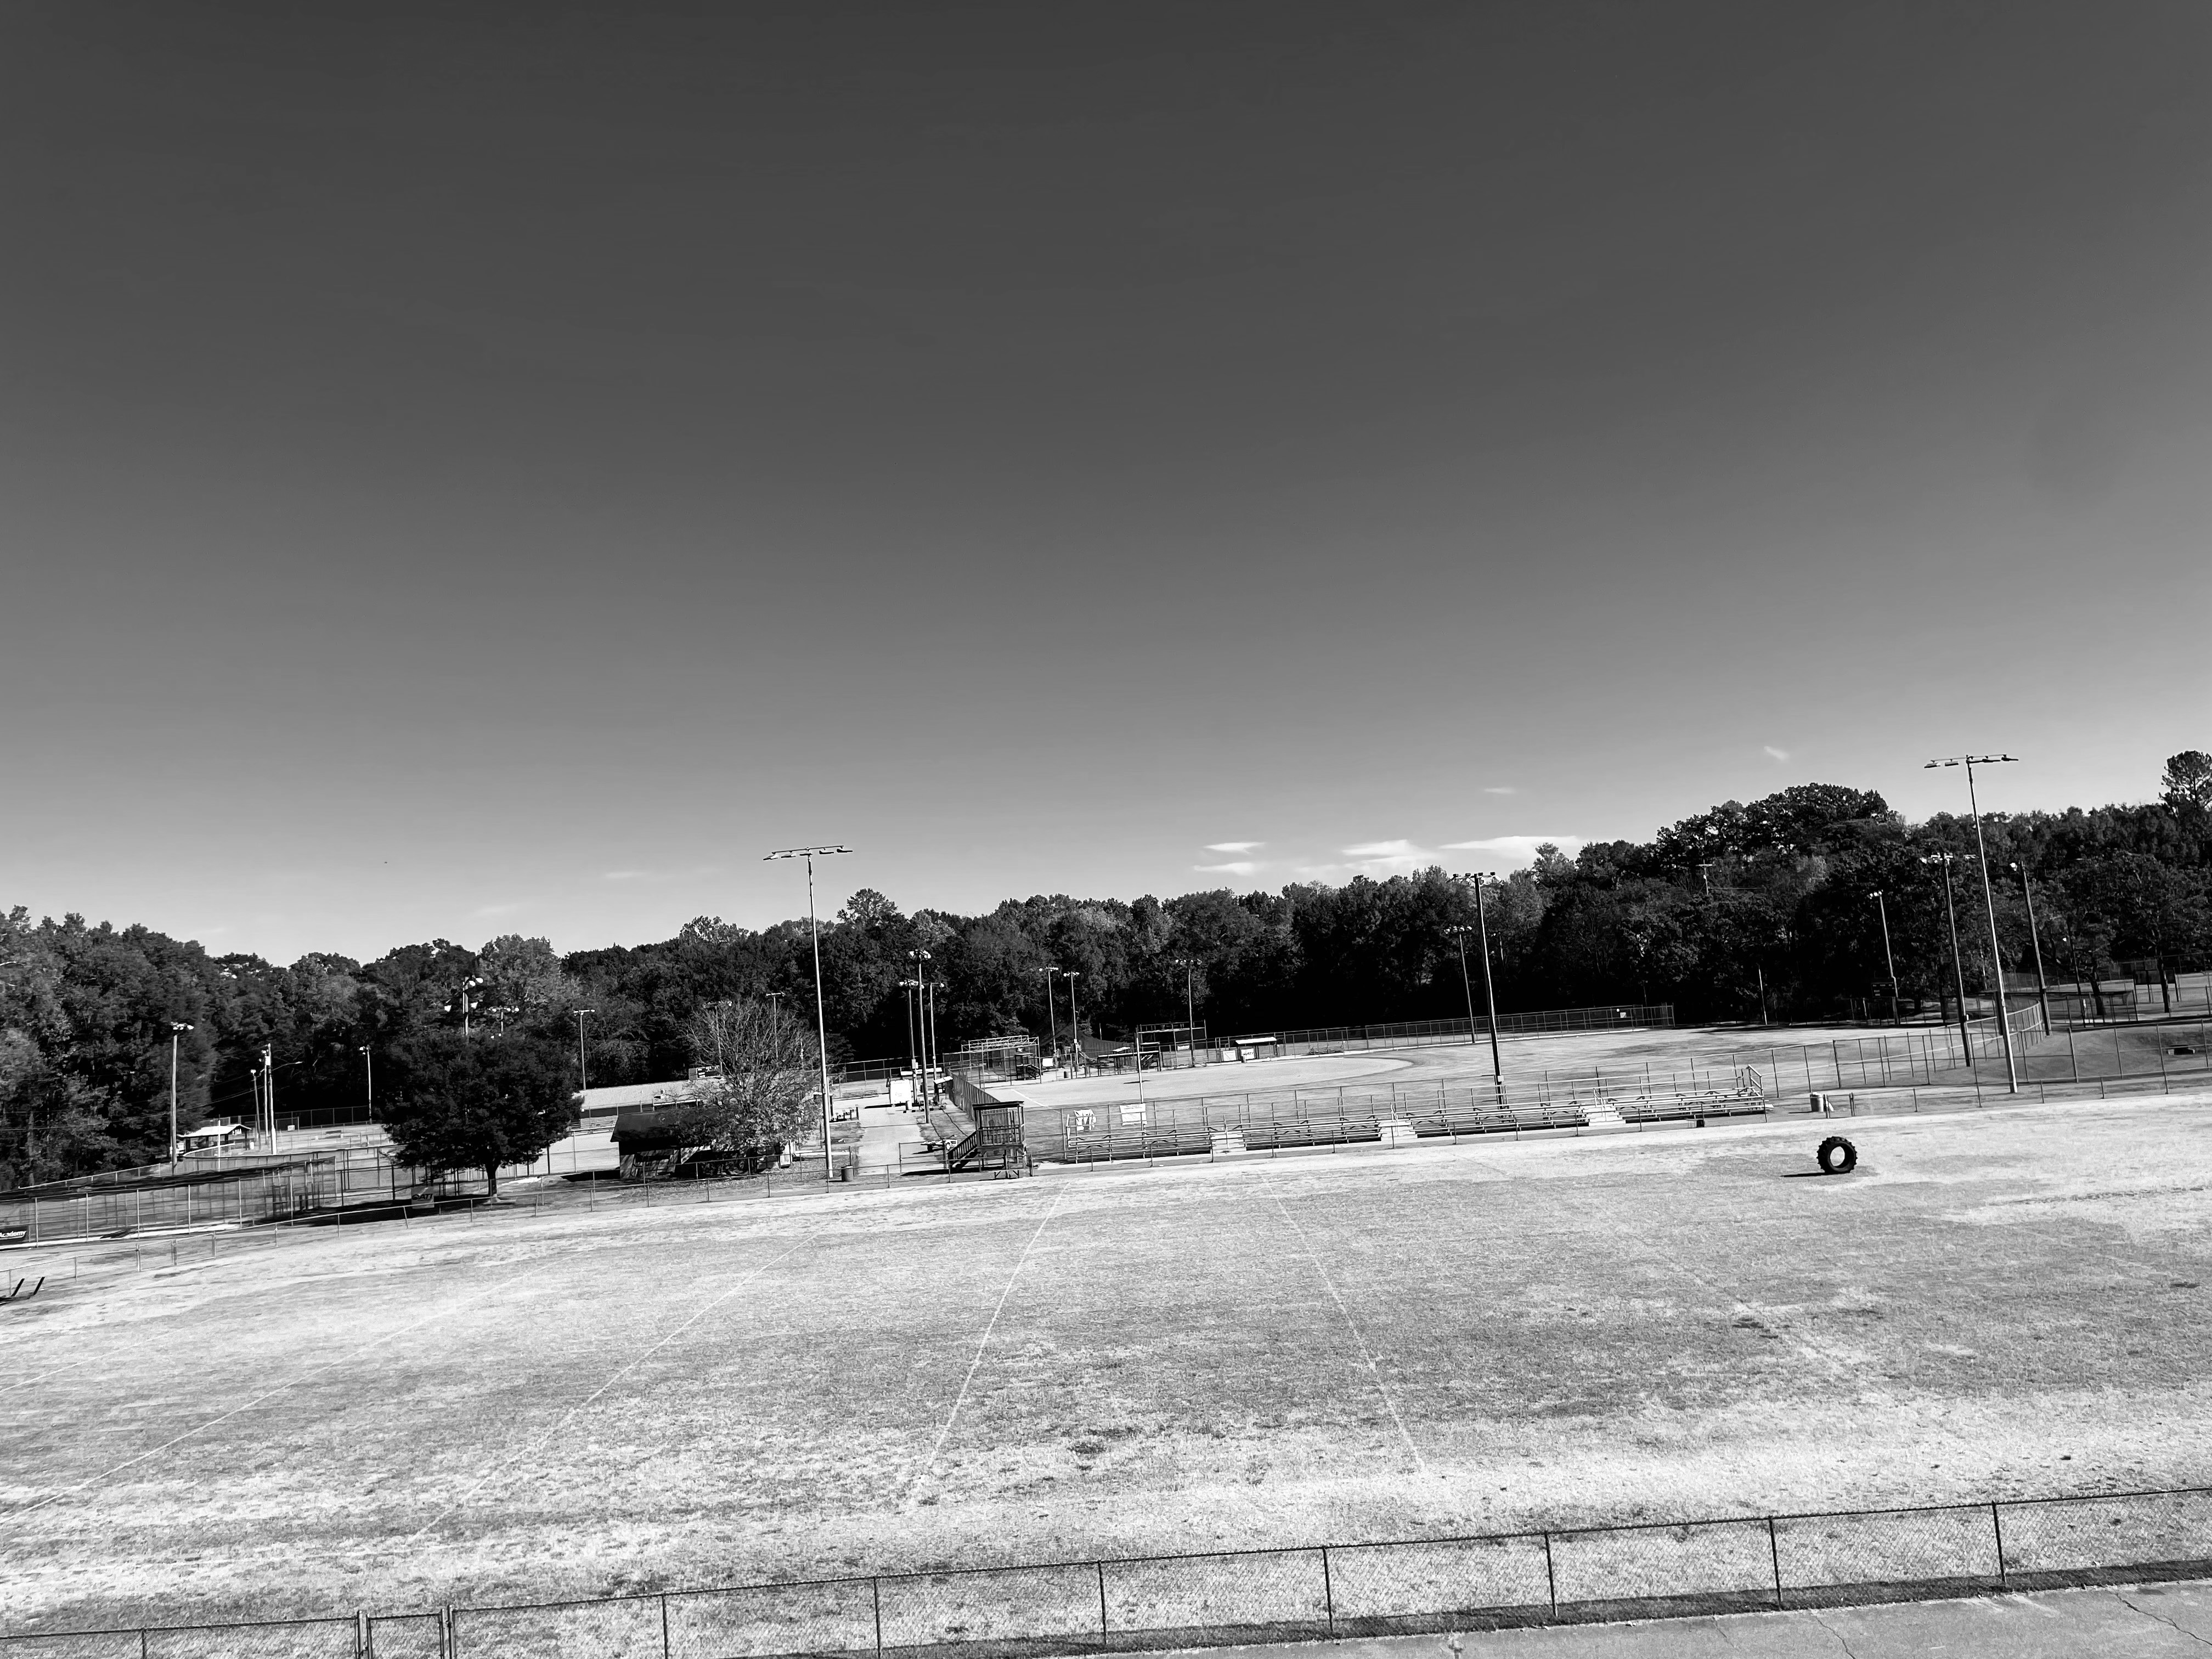 Ball field | image tagged in ball field,photos,photography,black and white | made w/ Imgflip meme maker